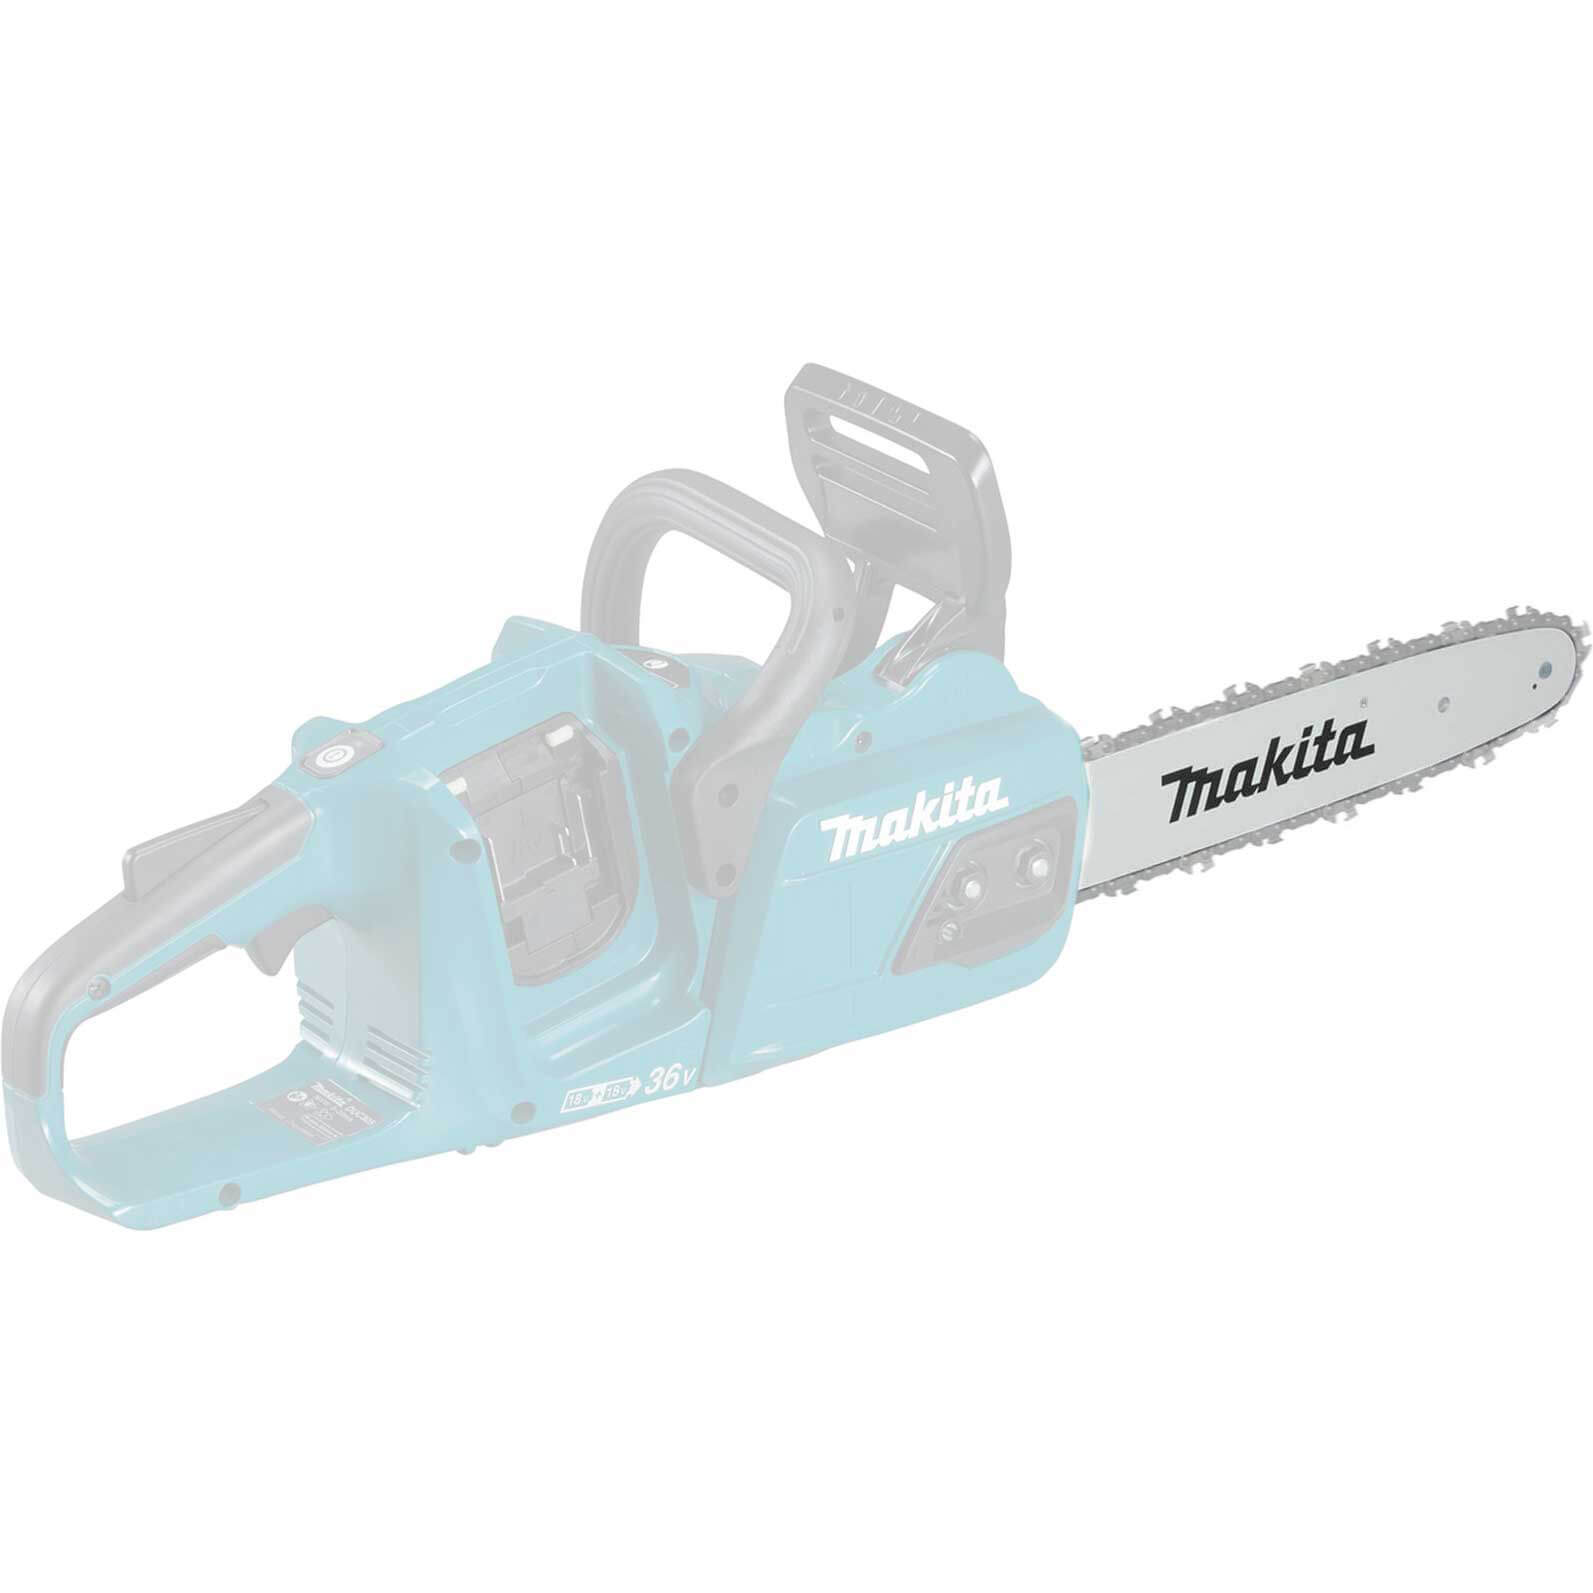 Photo of Makita Replacement Bar For Makita Chainsaw Duc305